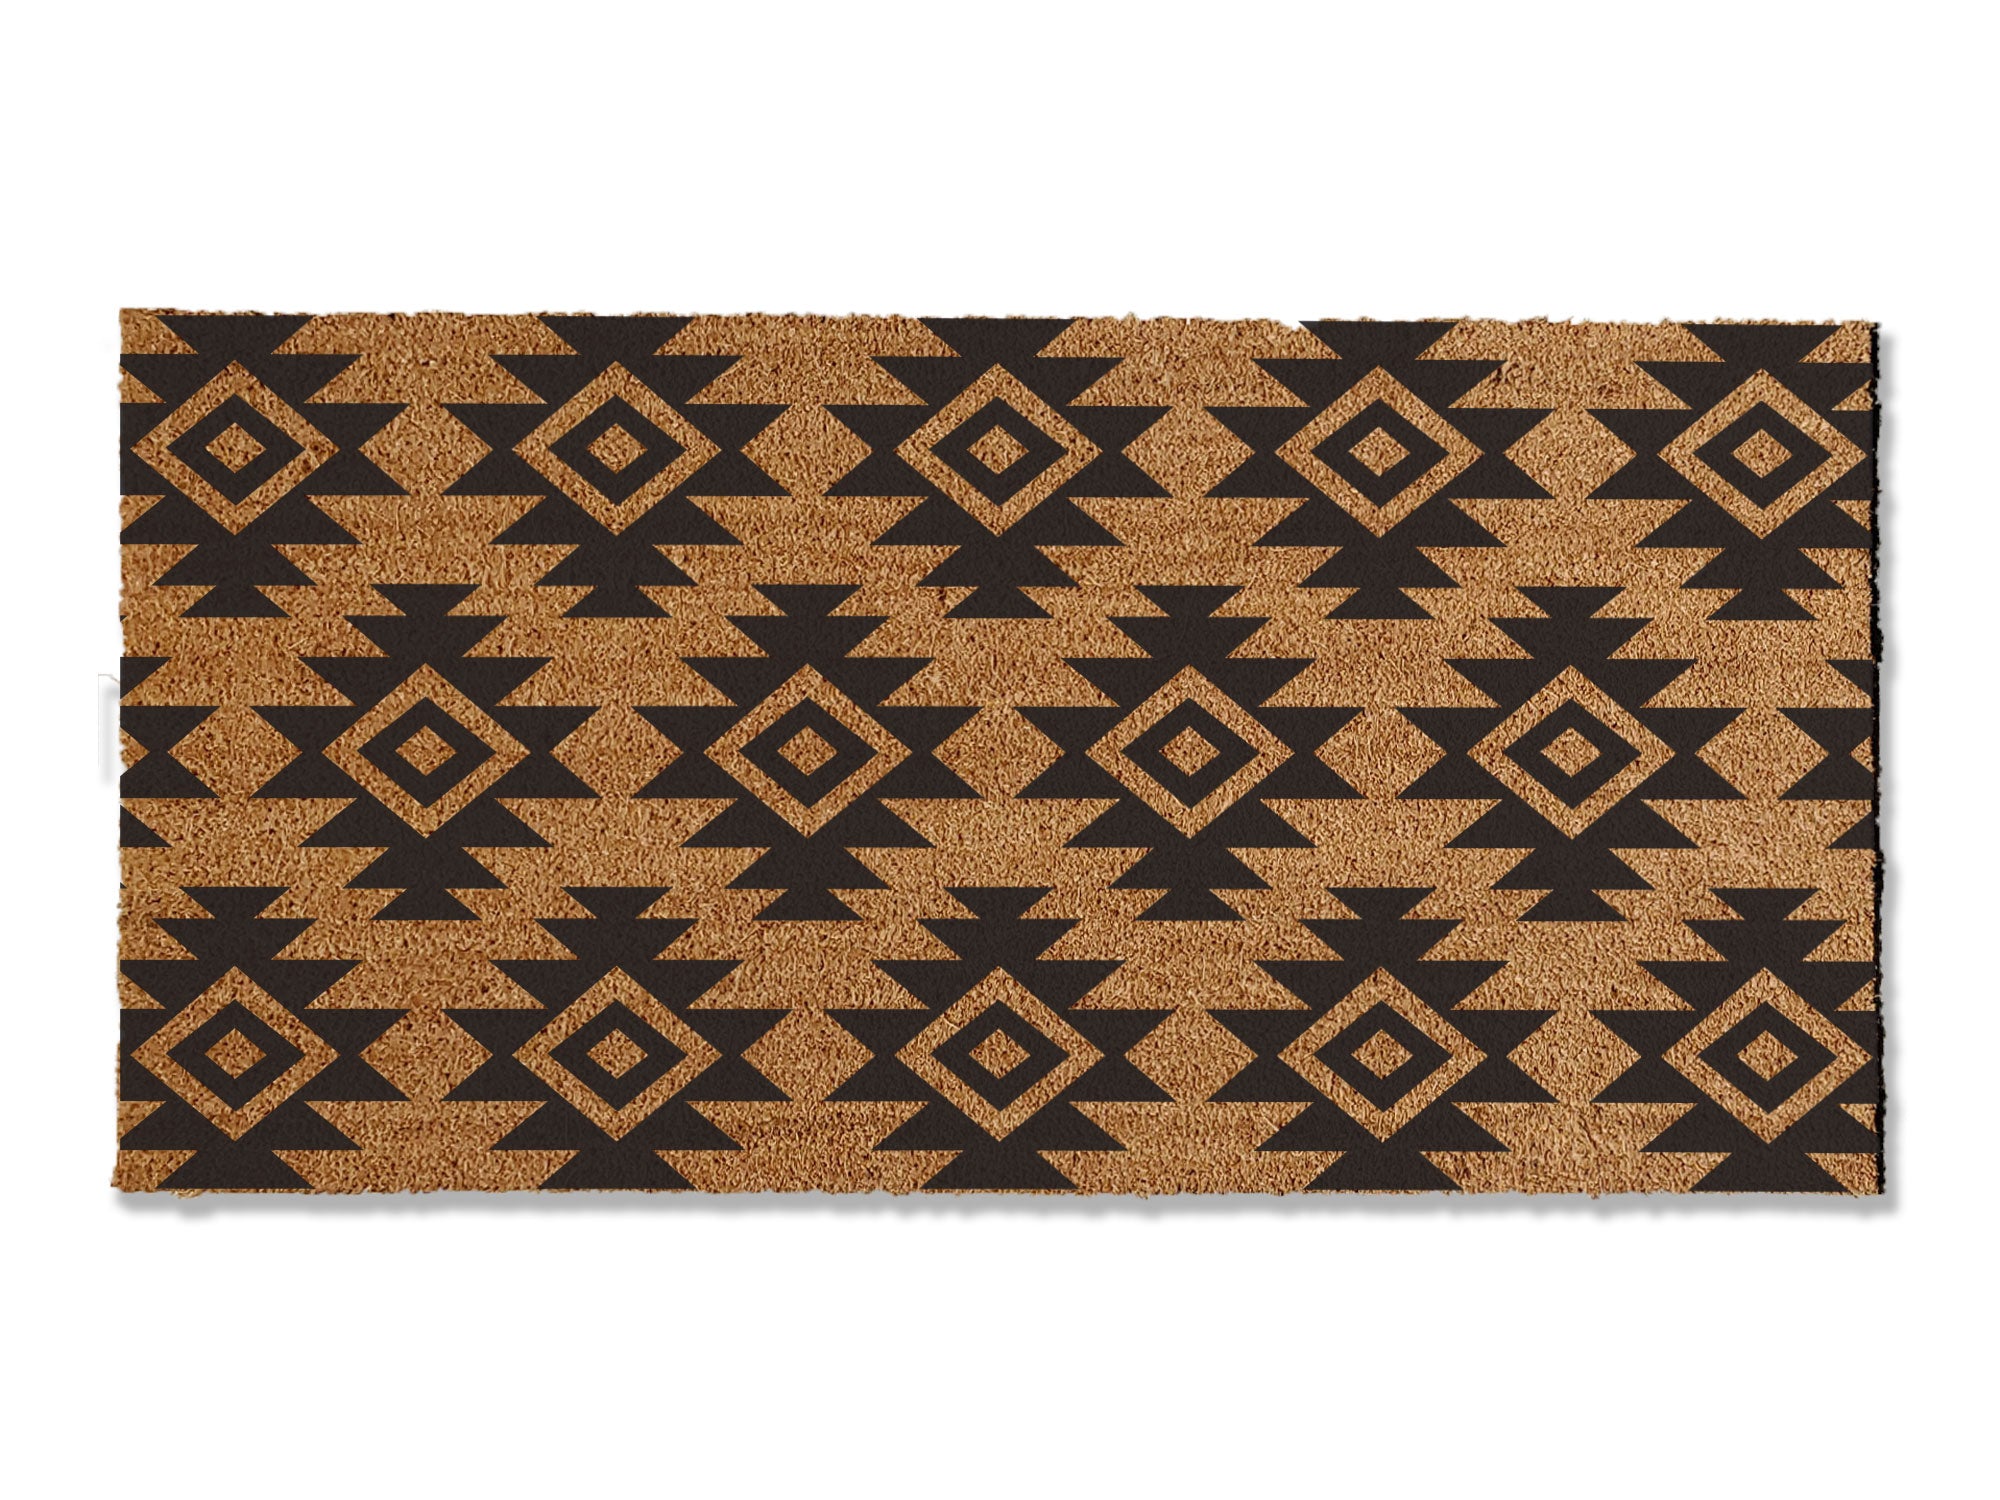 A coir doormat that is 24 inches by 48 inches and has a geometric aztec print painted on it.